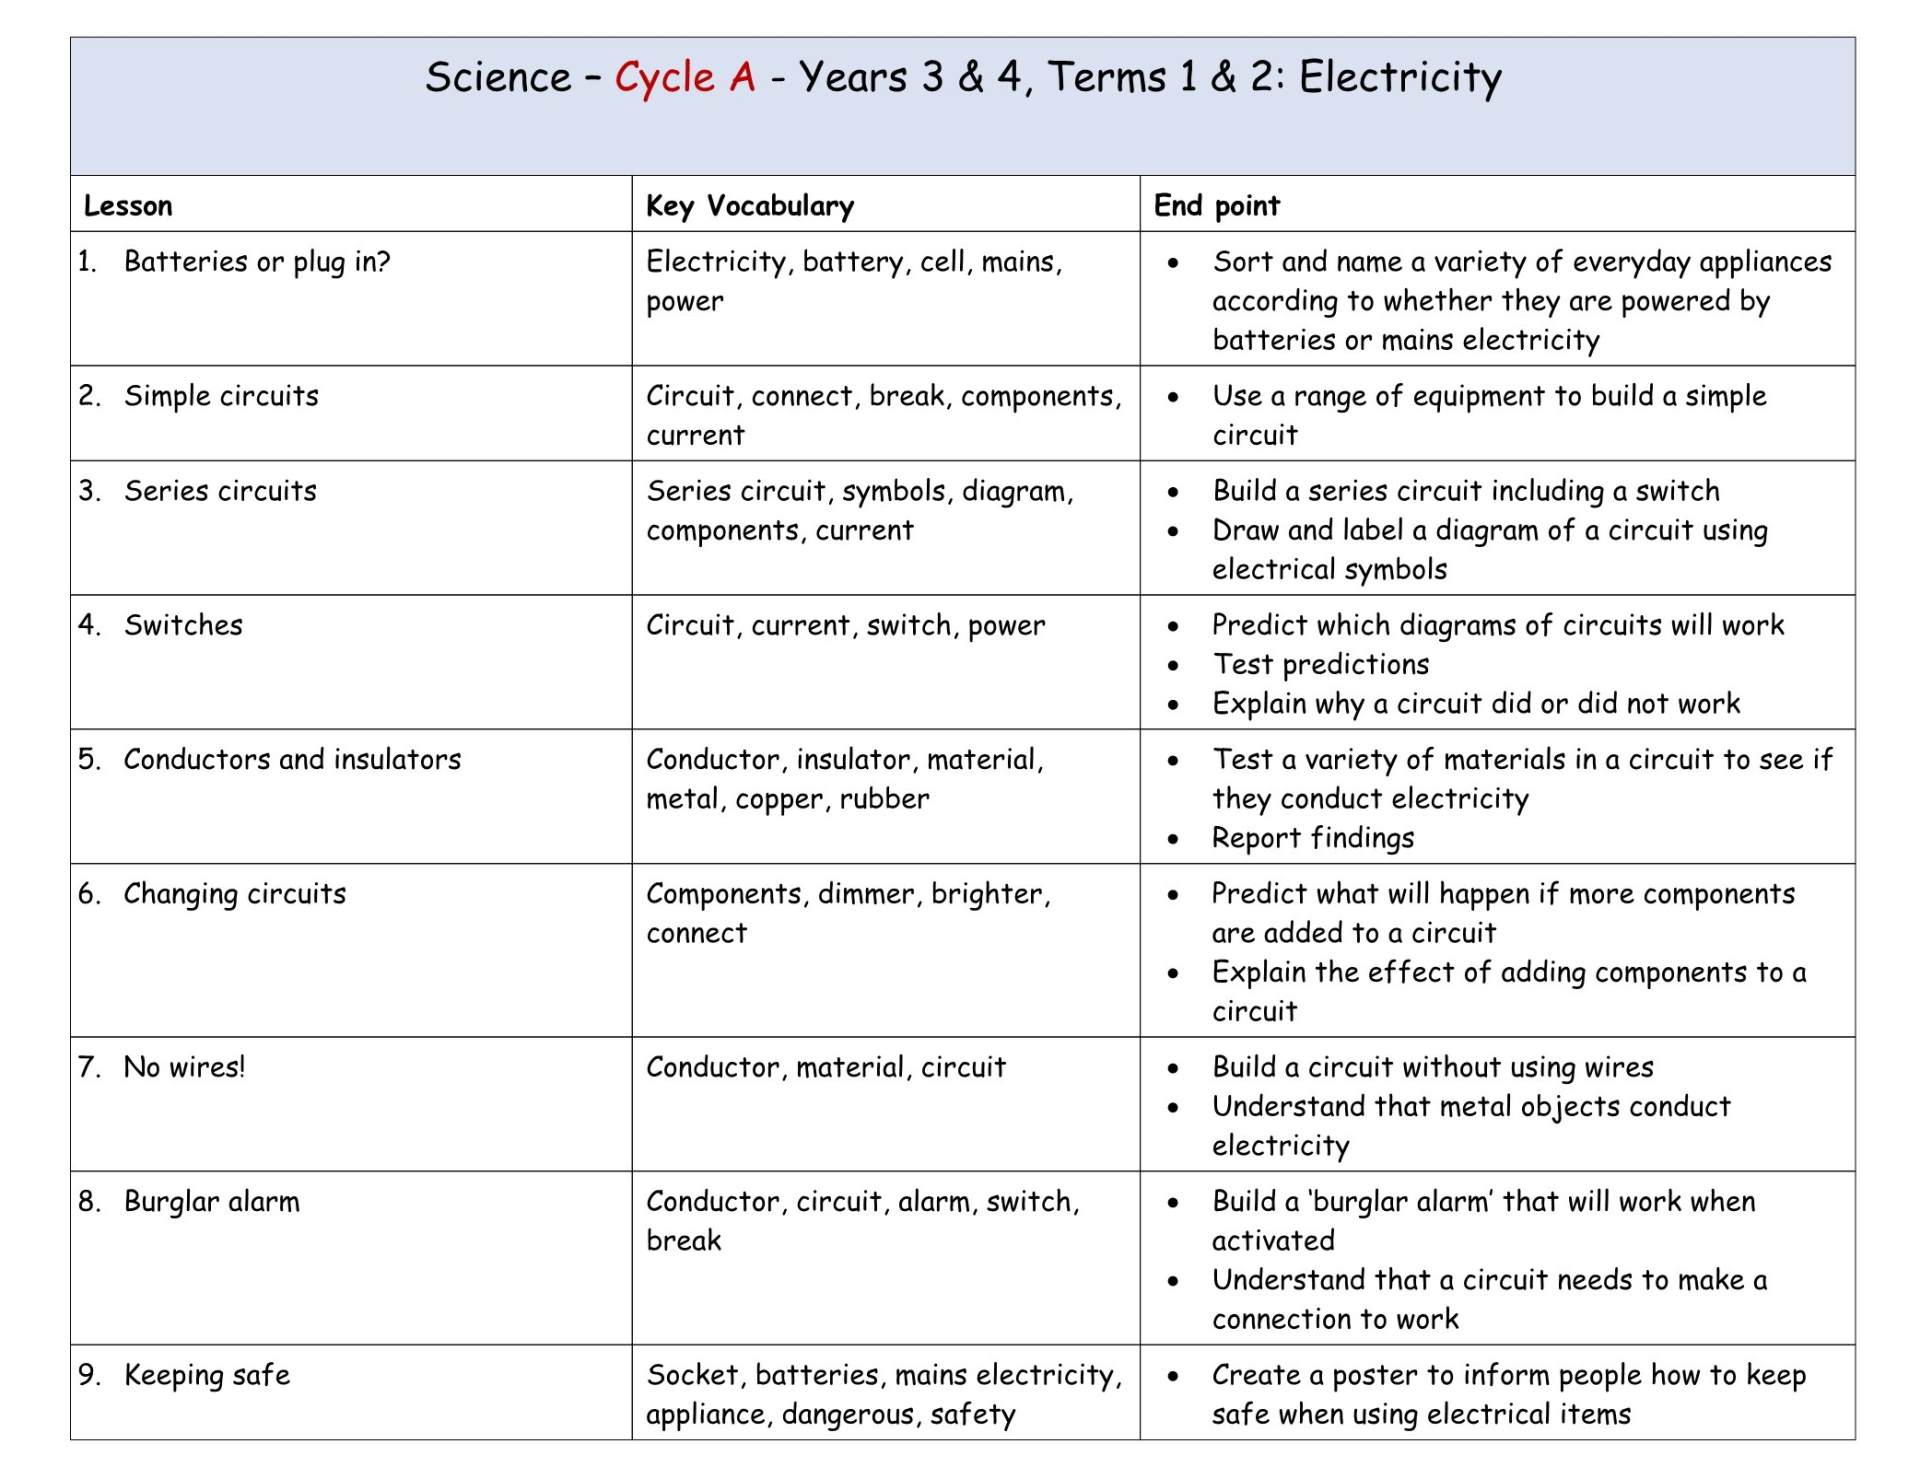 Science Y3-4 Cycle A MTP T1&2